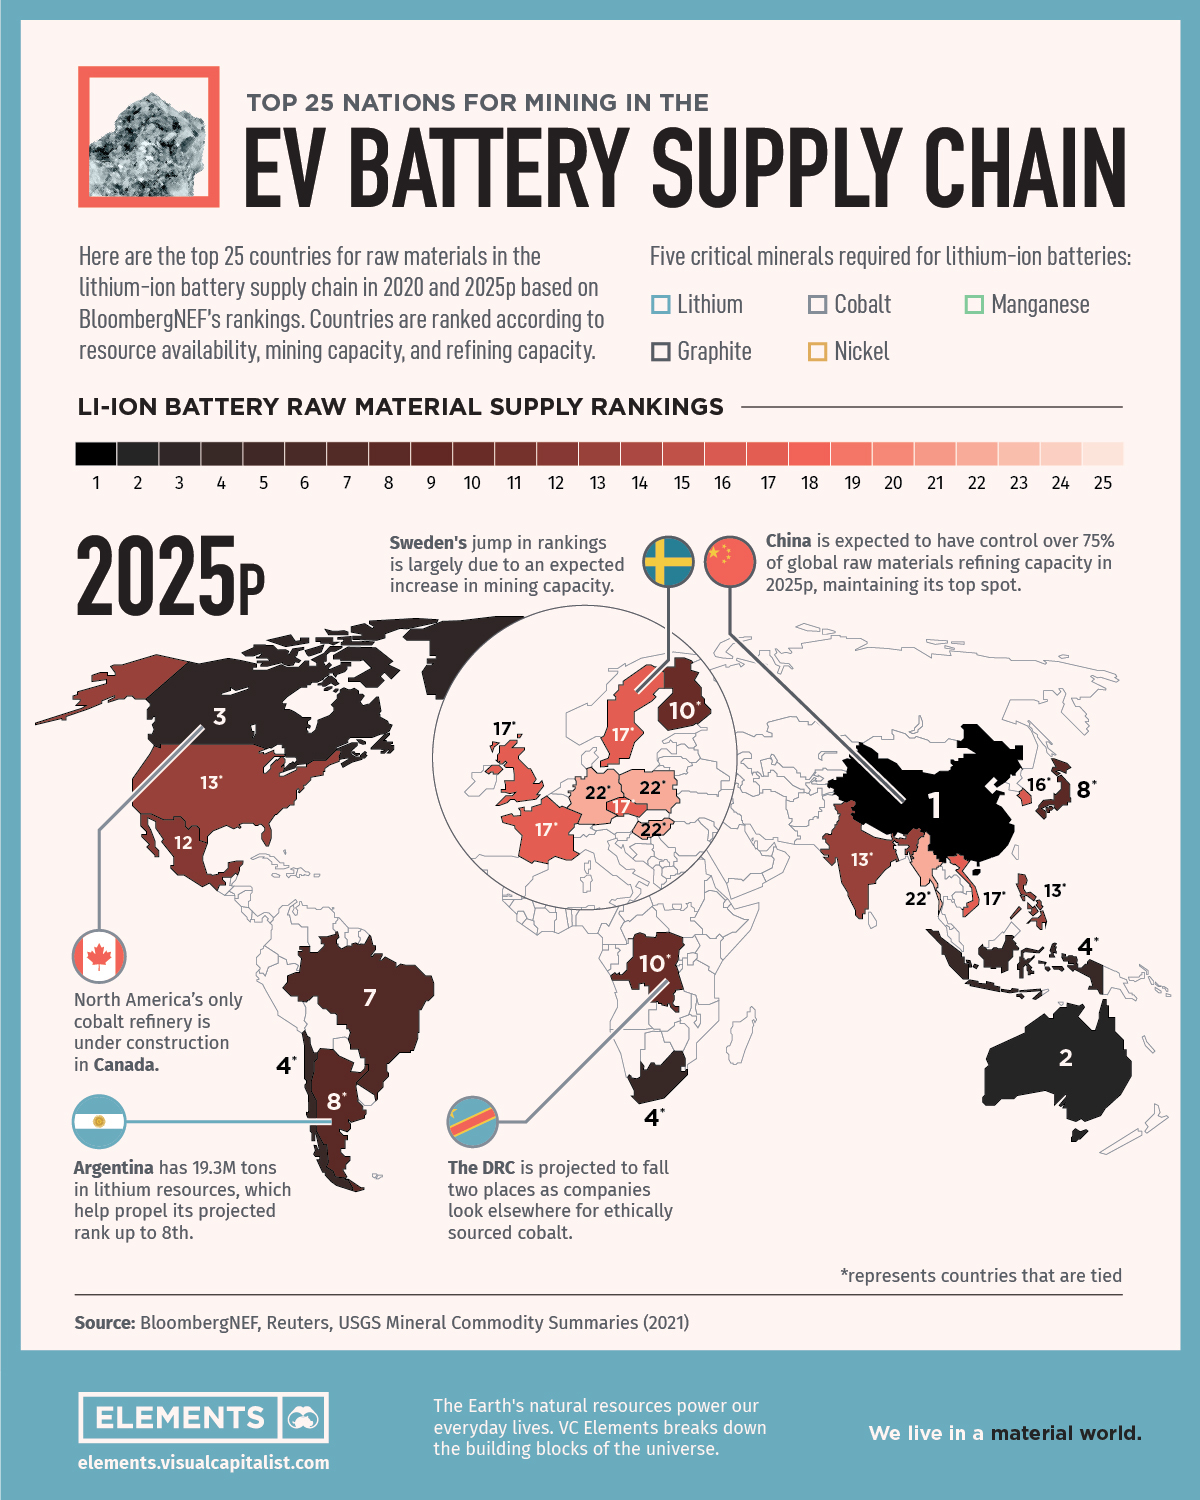 Ranked: Top 25 Nations Producing Battery Metals for the Chain